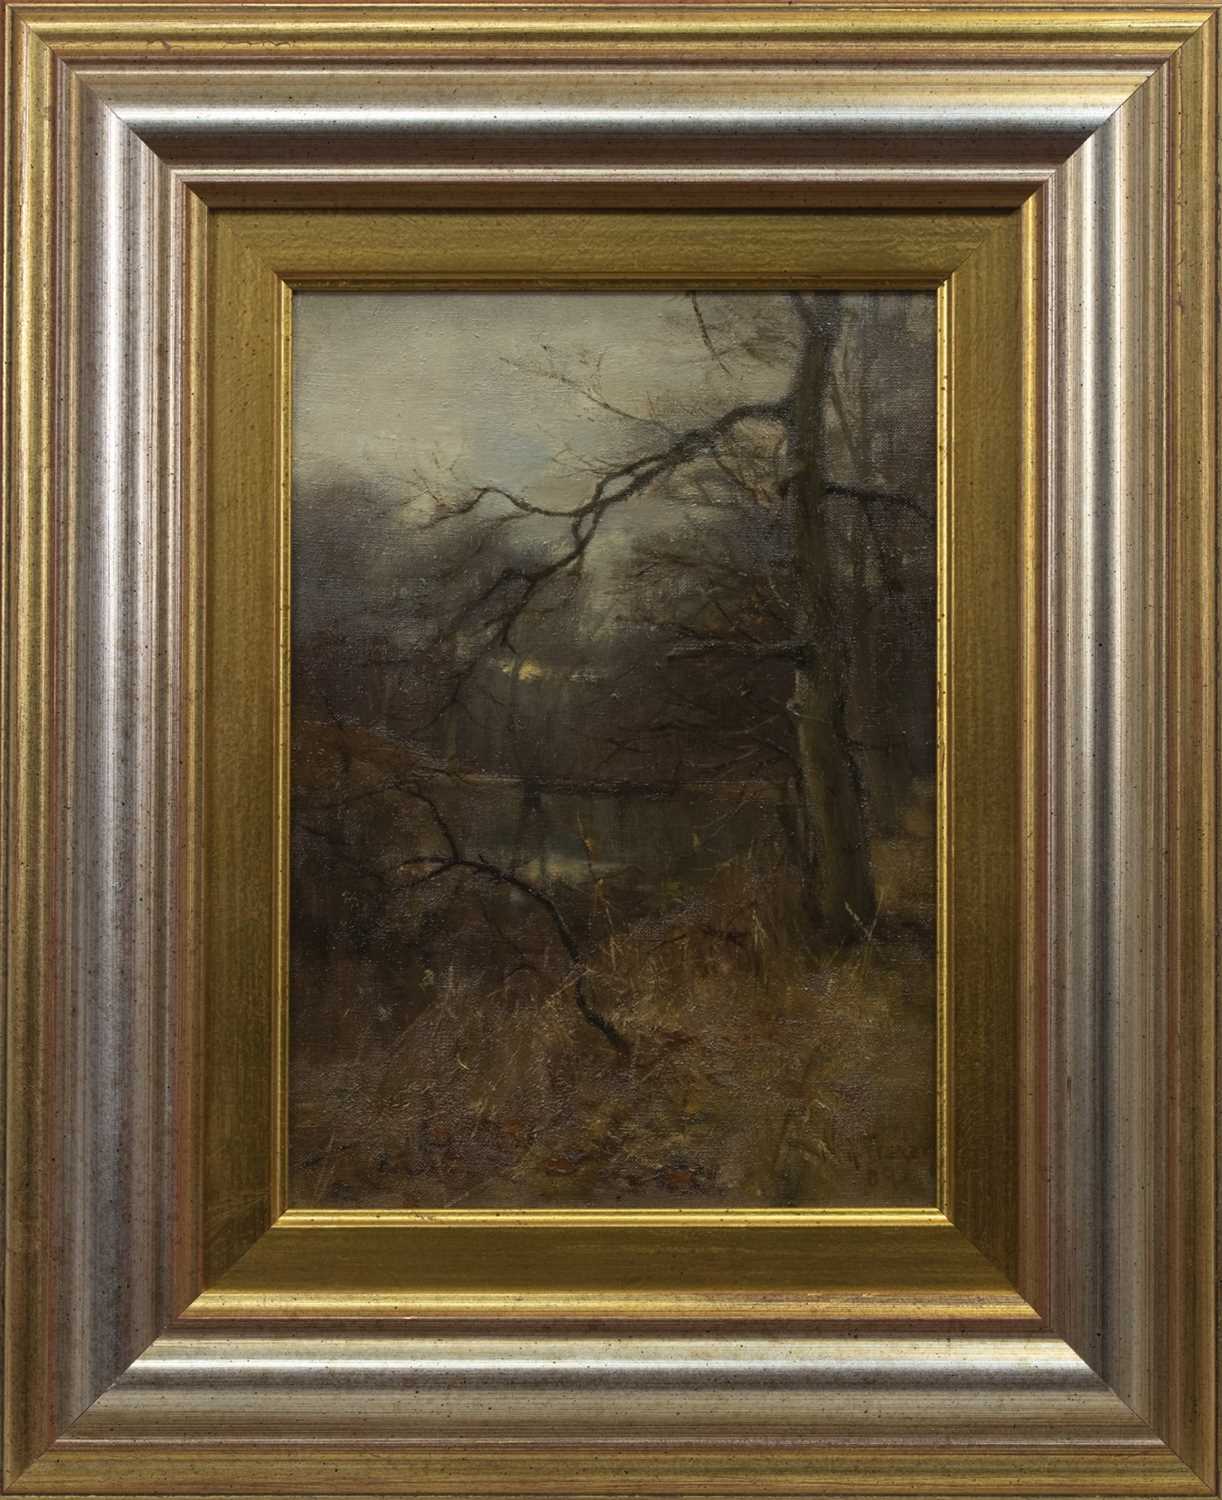 Lot 25 - TREES BY A RIVER, AN OIL BY WILLIAM MILLER FRAZER